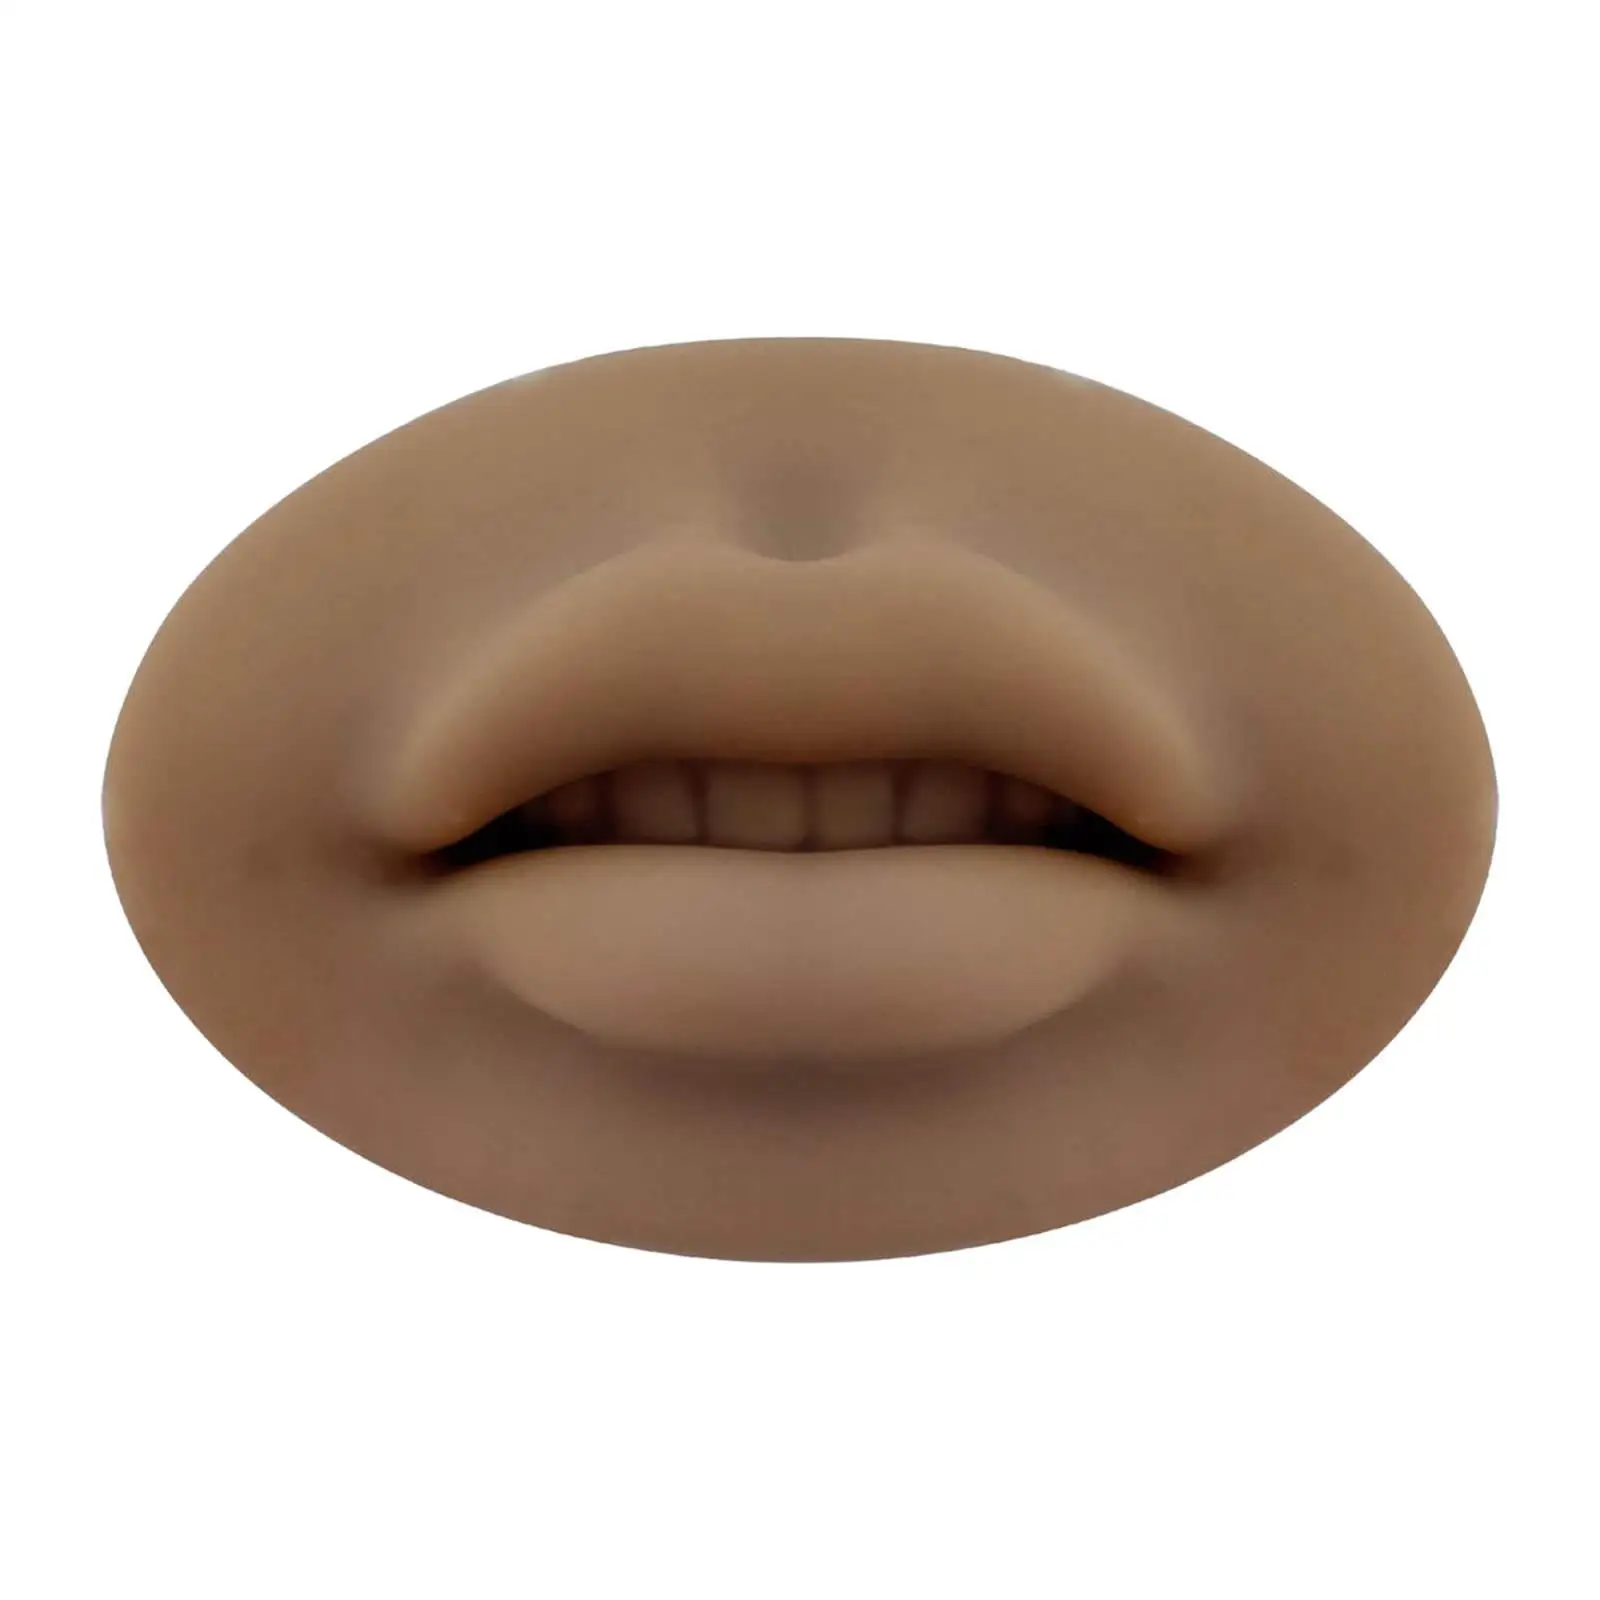 Silicone Lip Model 3D Permanent Makeup Training Durable for Delicate Texture